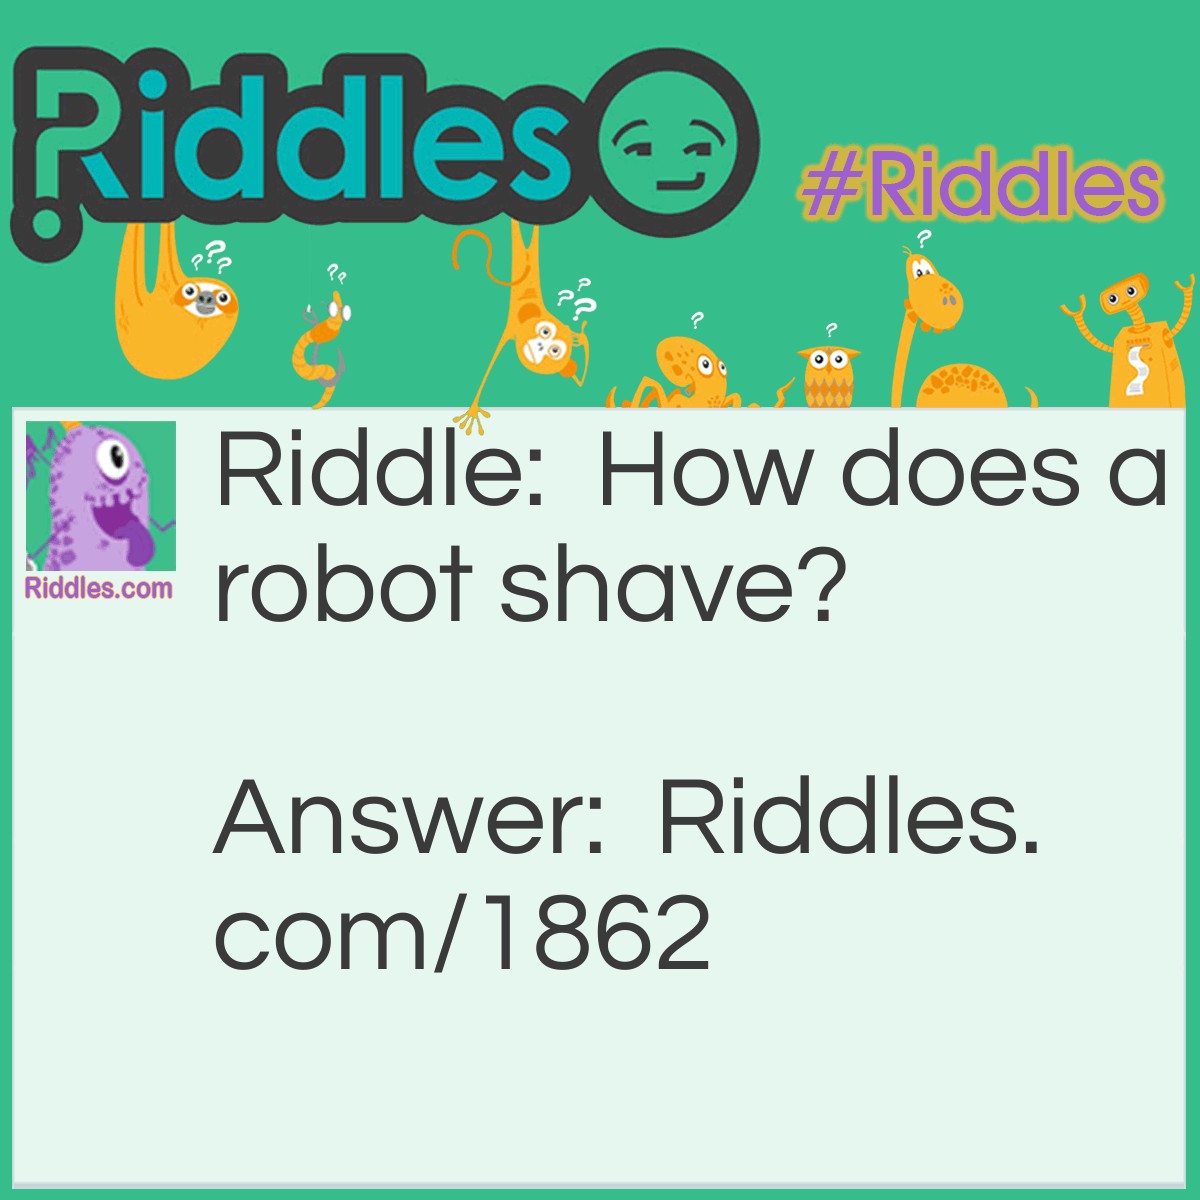 Riddle: How does a robot shave? Answer: With a laser blade.